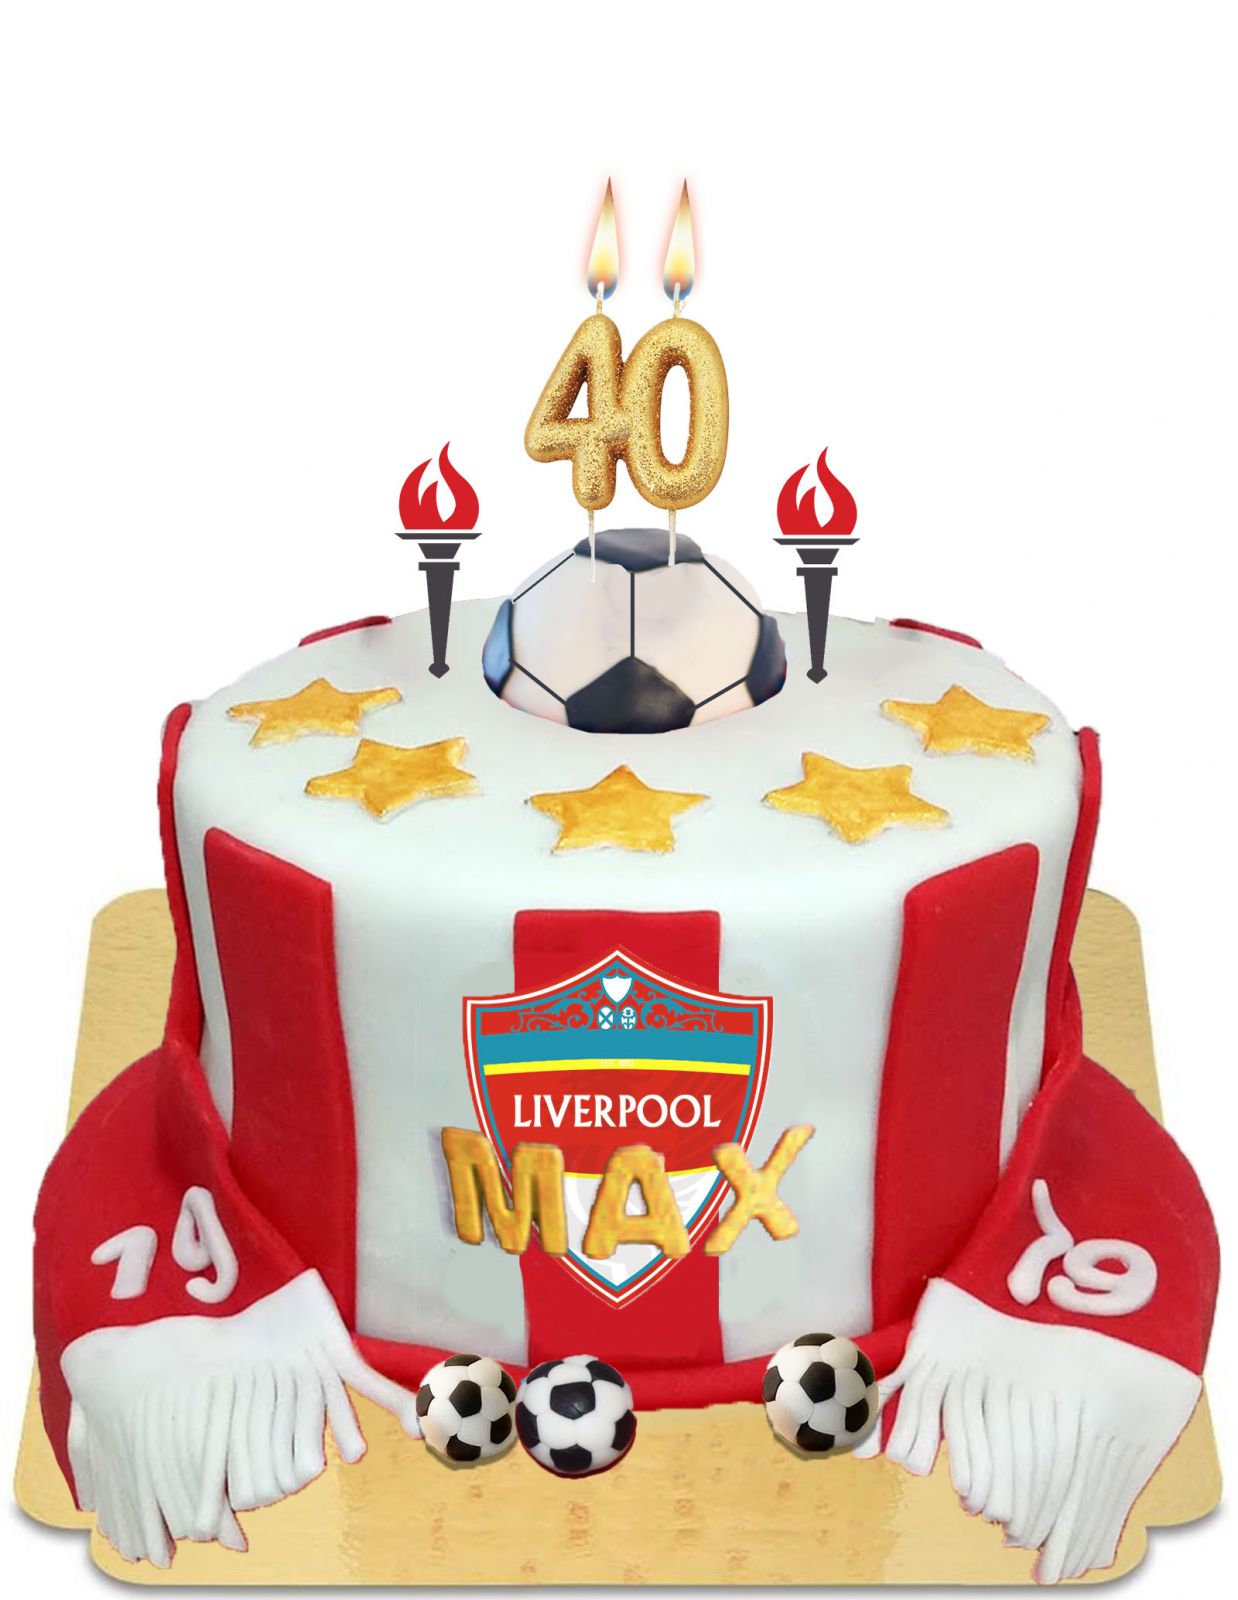 45 Awesome Football Birthday Cake Ideas : Liverpool Cake for 13rd Birthday